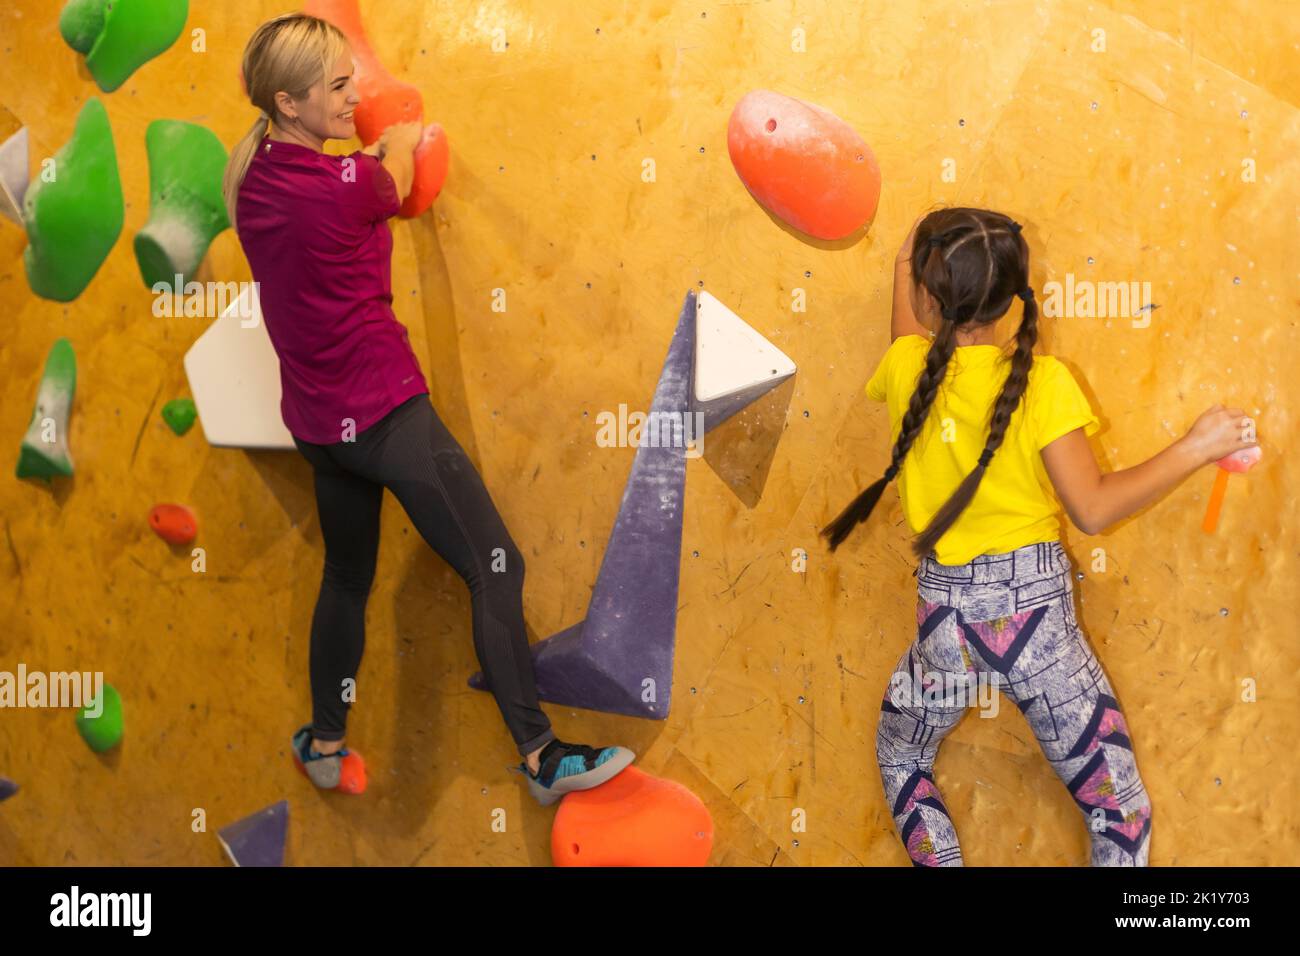 Instructors Helping Children Climb Wall In Gym Stock Photo Alamy